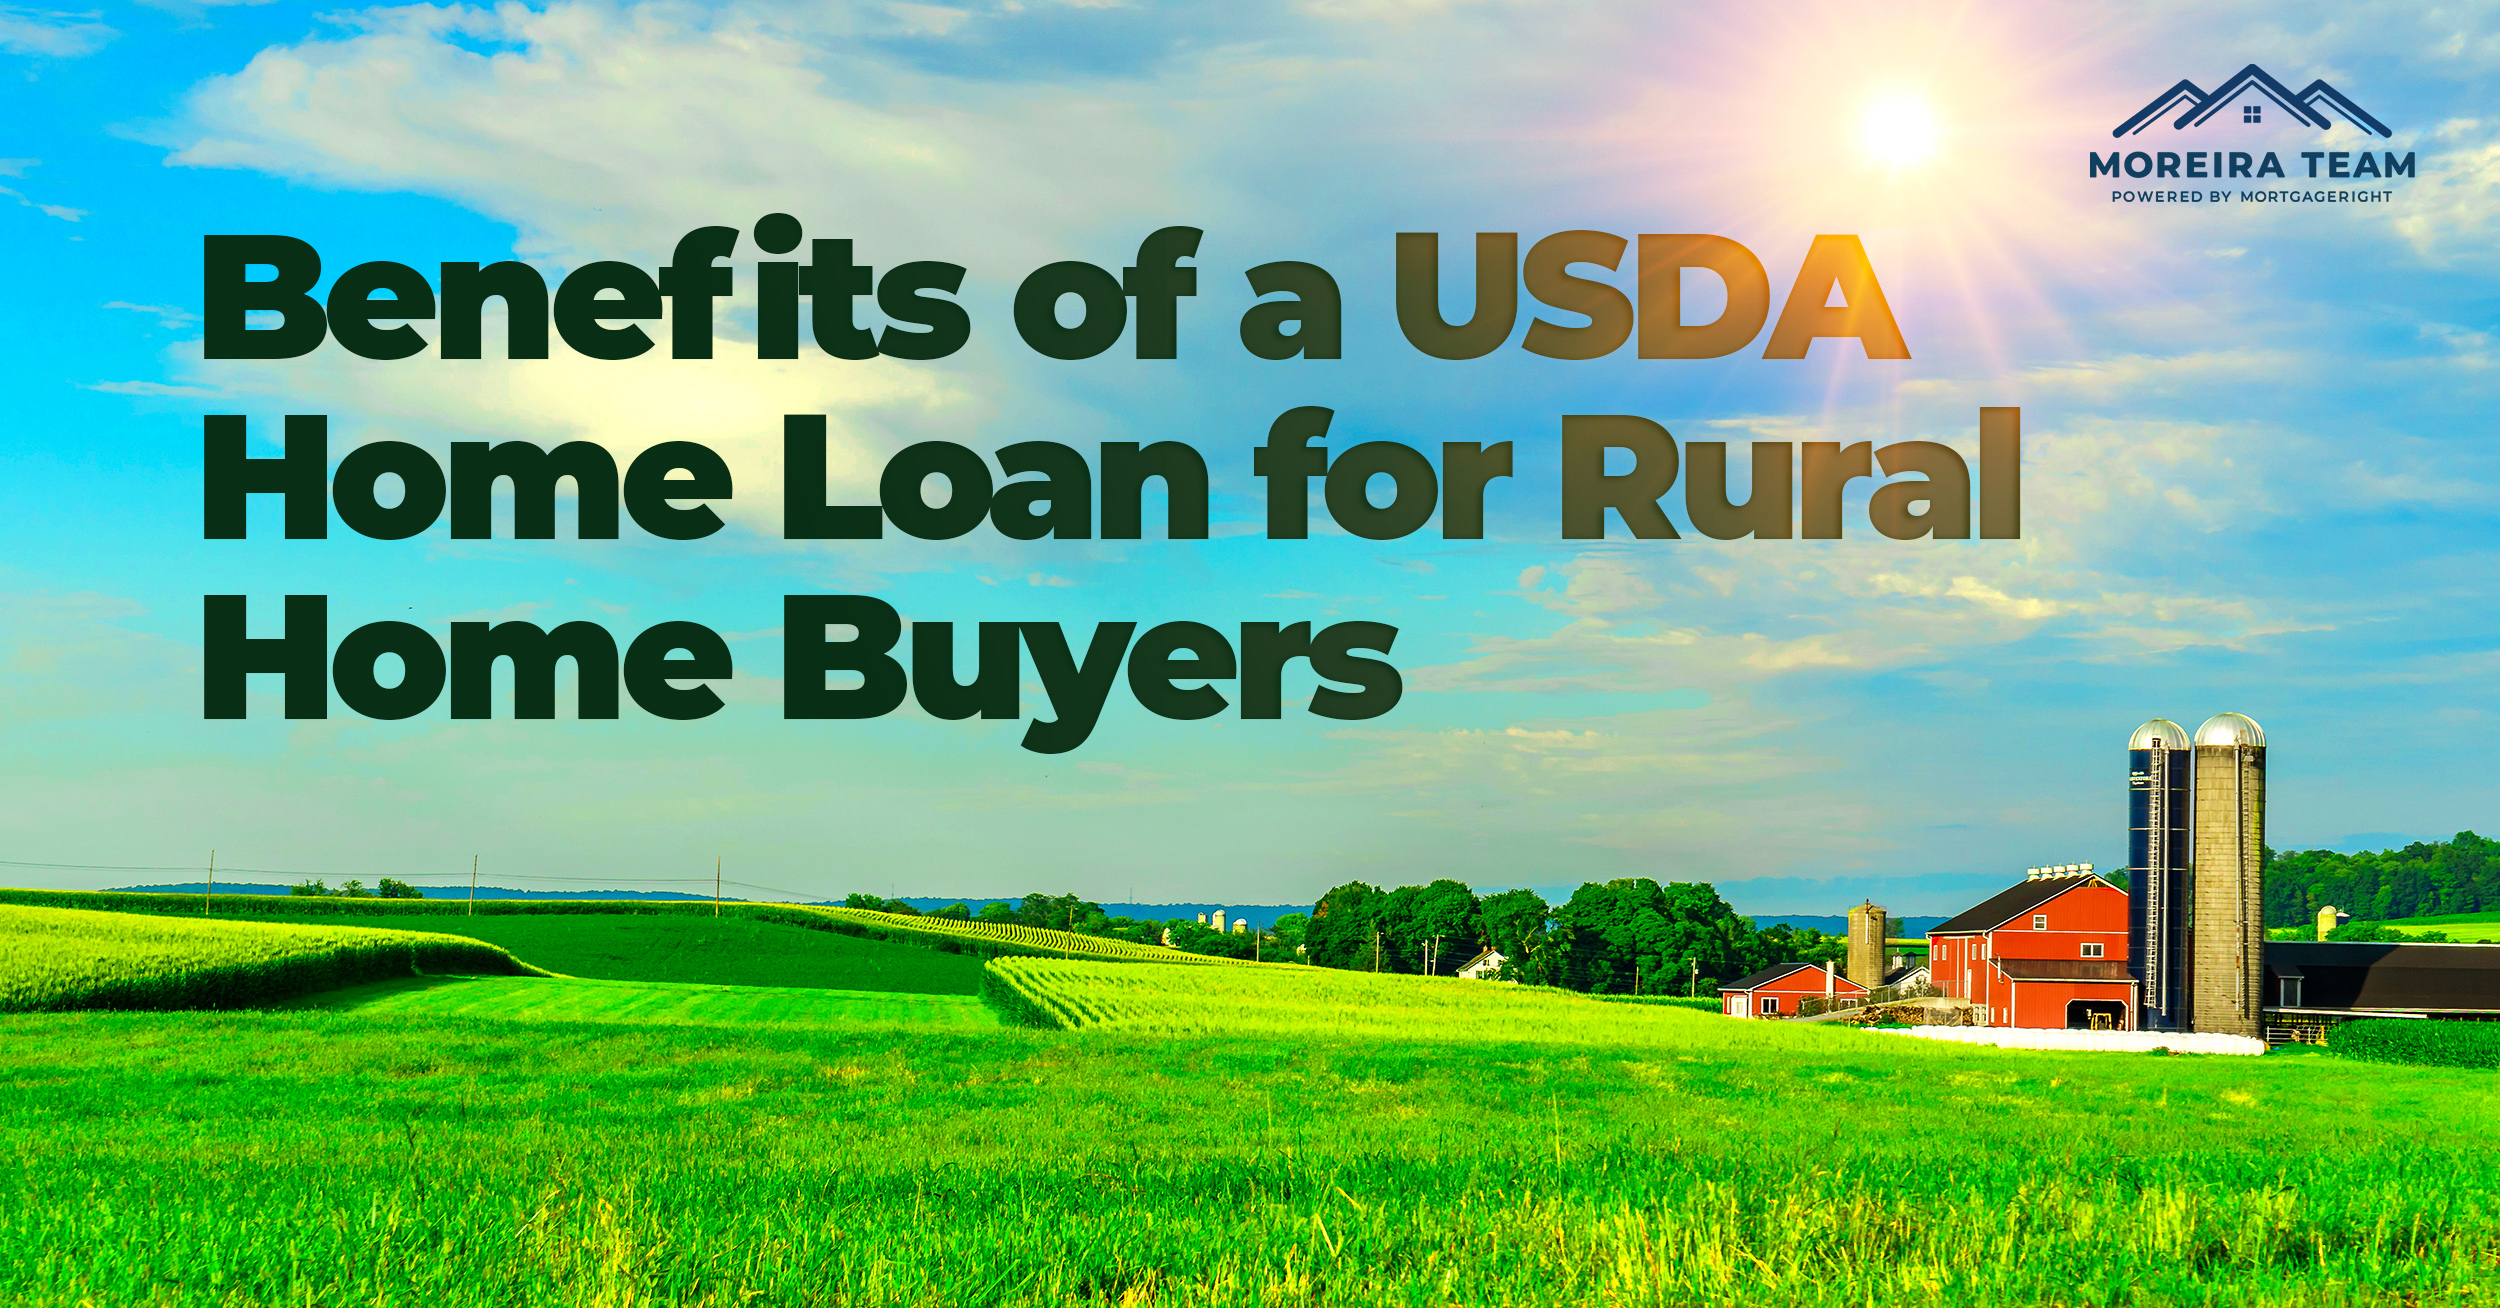 Discover the Benefits of a USDA Home Loan for Rural Home Buyers